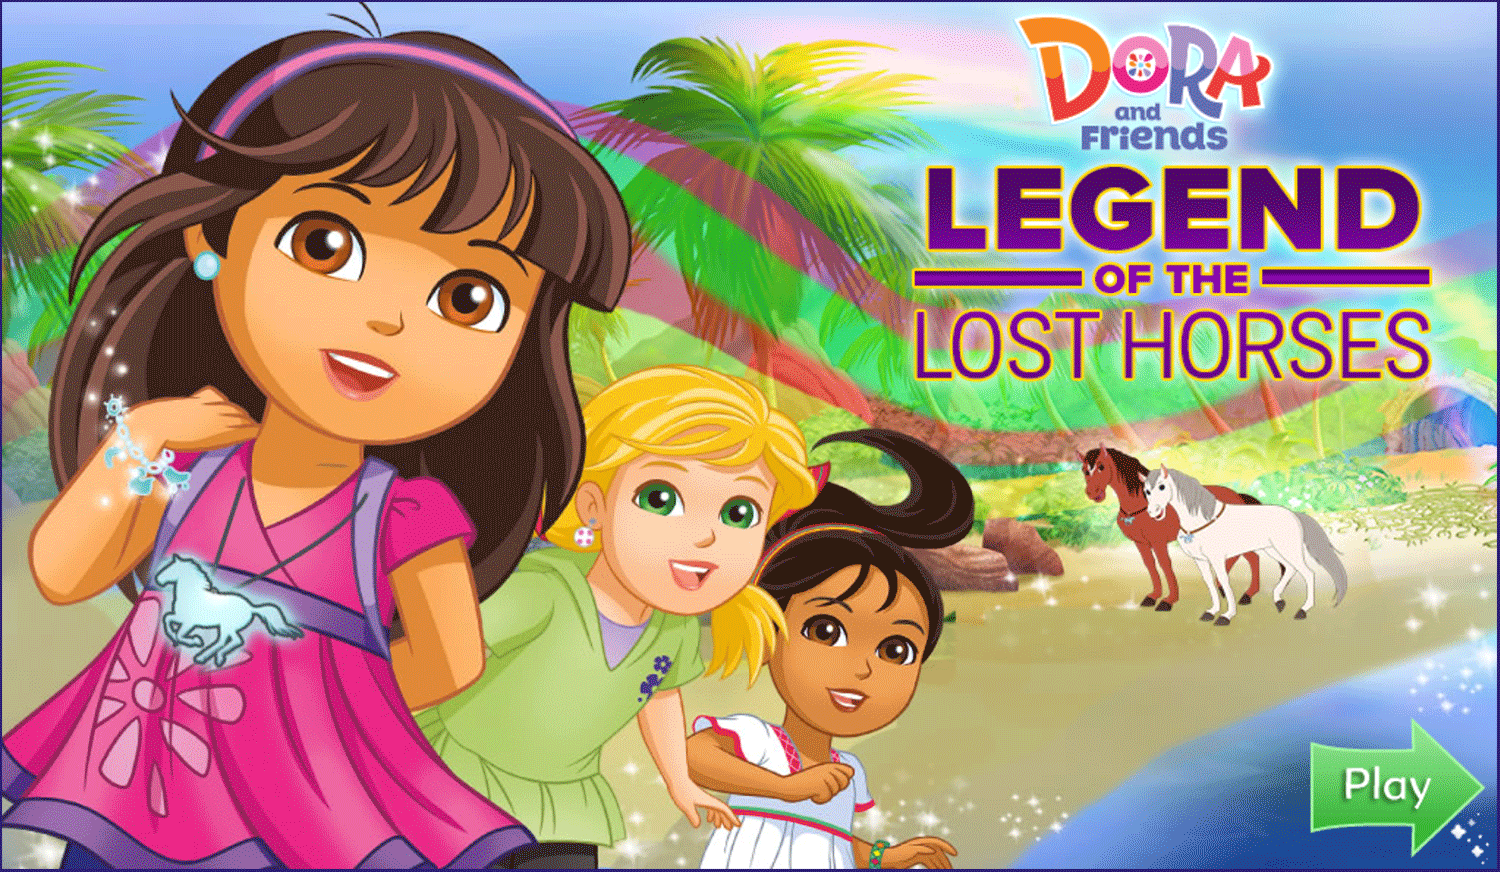 Dora and Friends Legend of the Lost Horses Game Welcome Screen Screenshot.